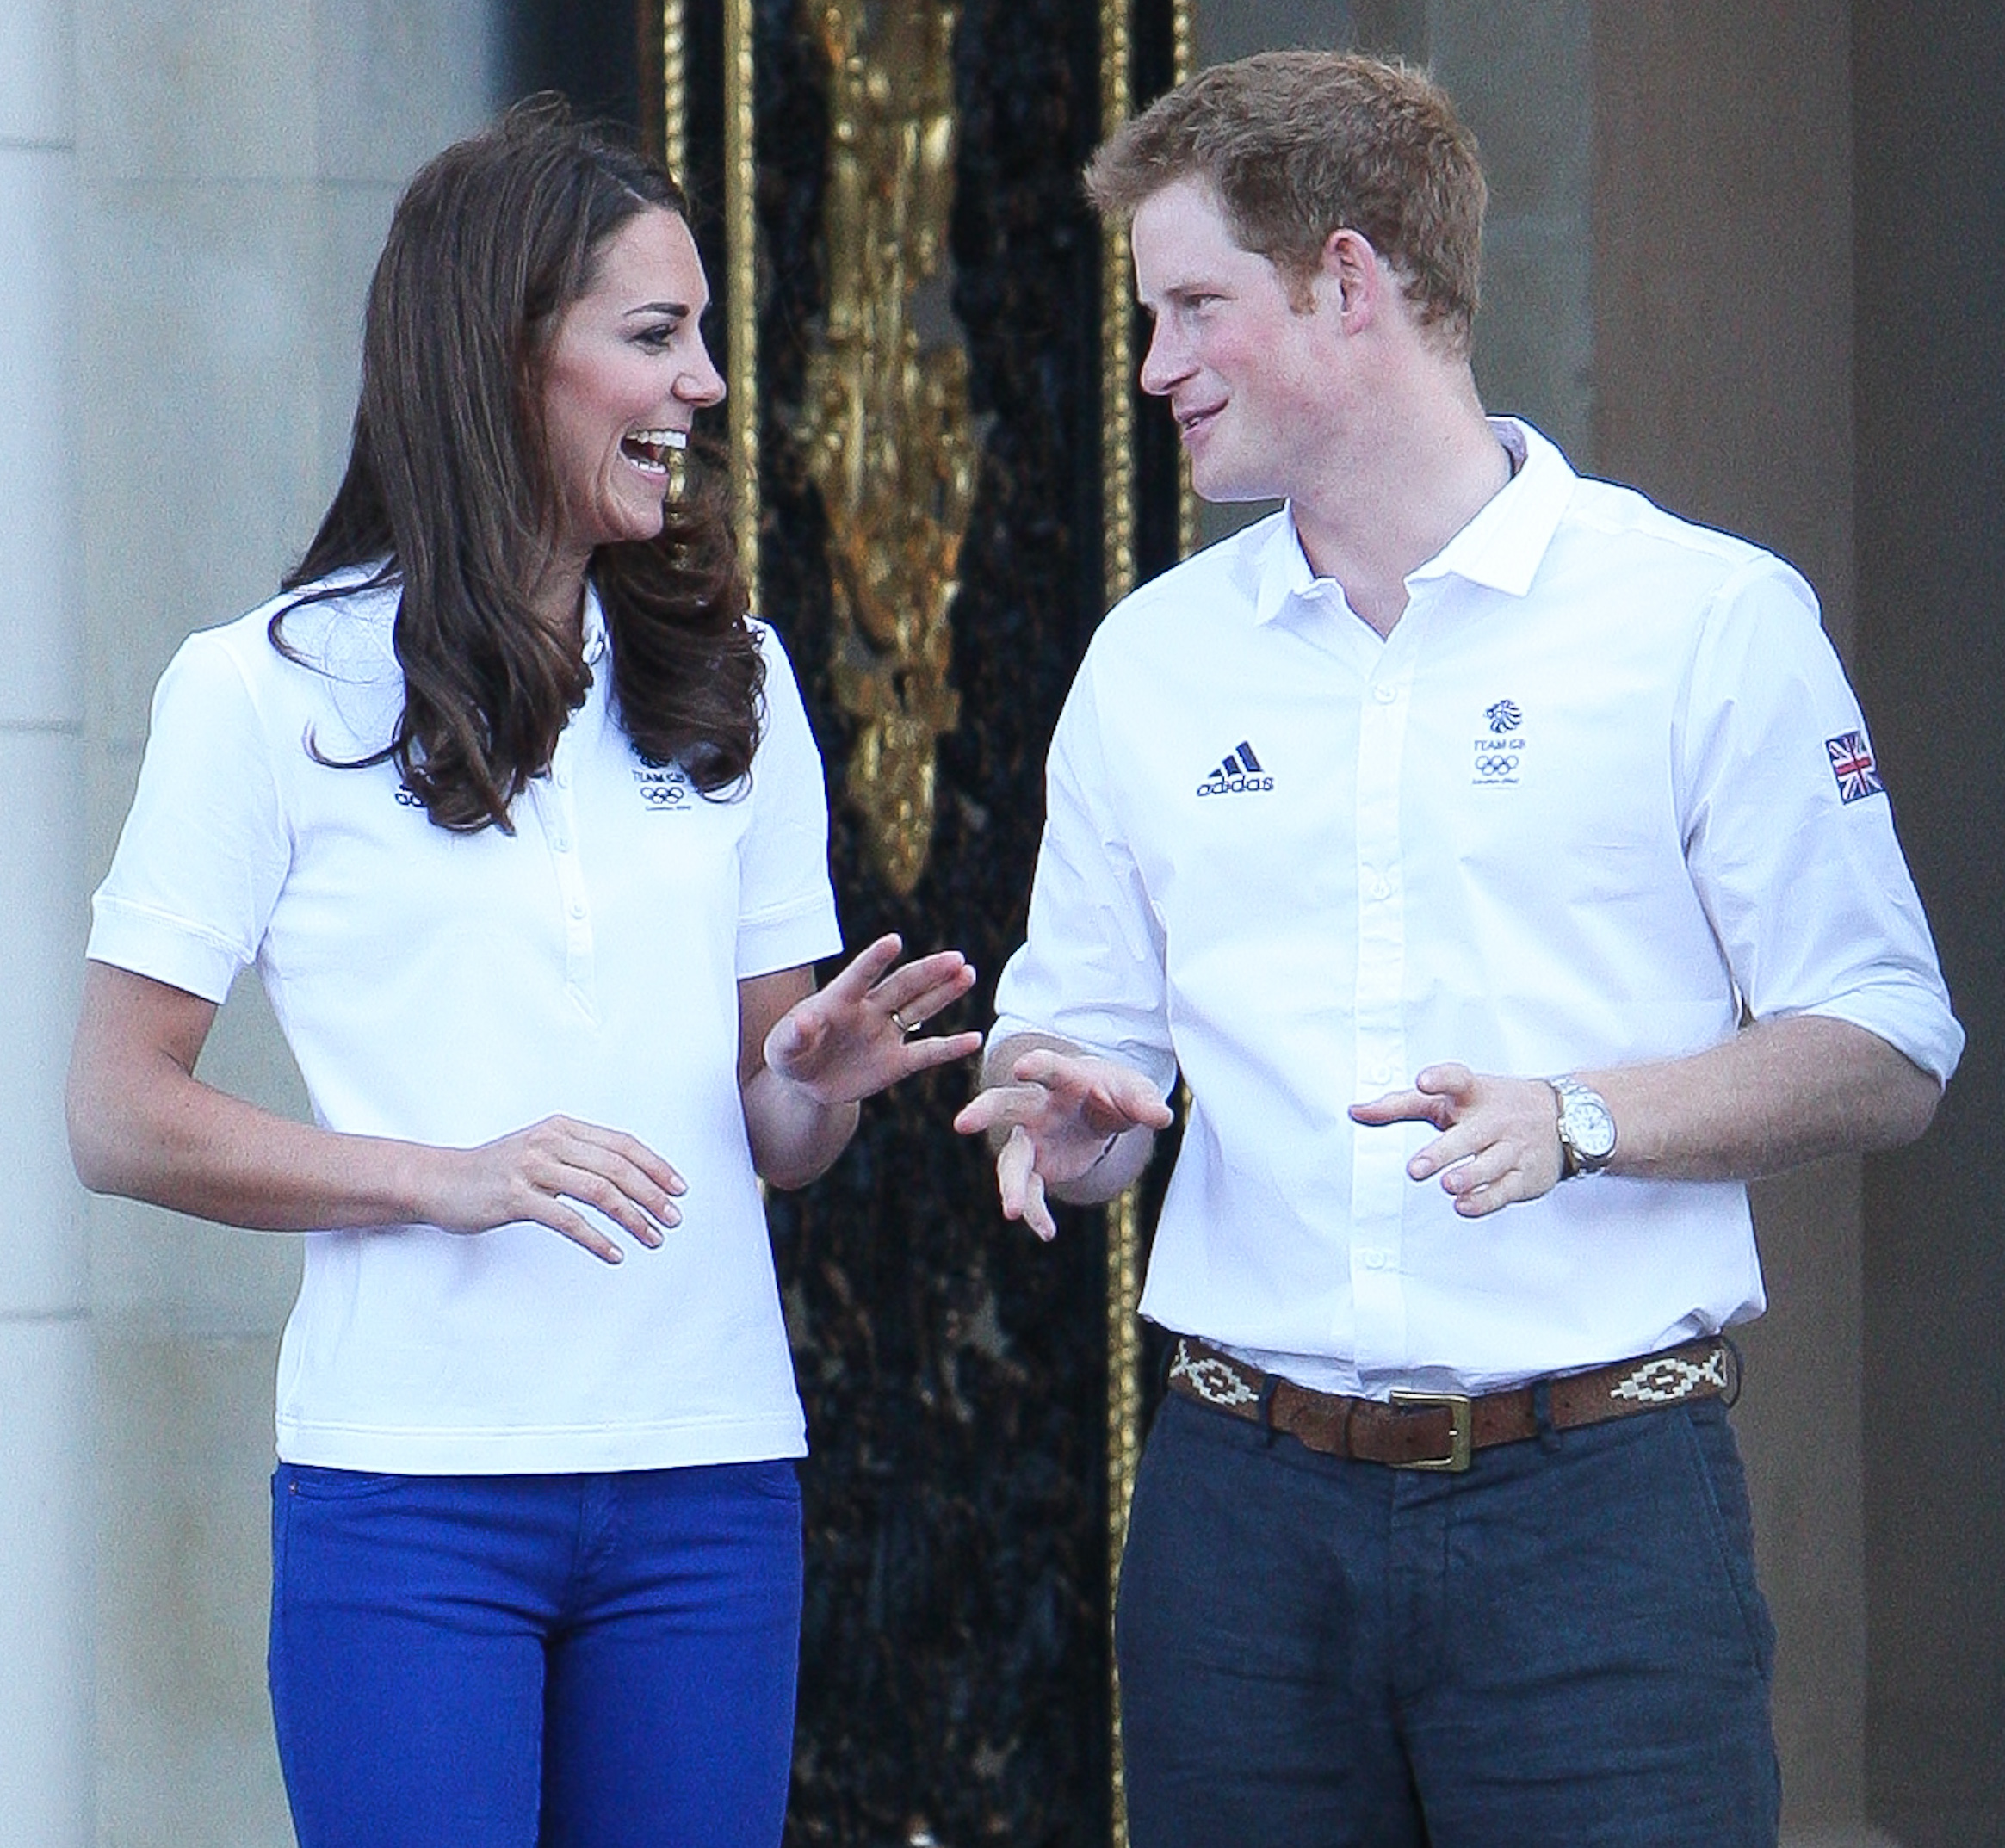 Prince Harry Has A Cute Nickname For Kate Middleton